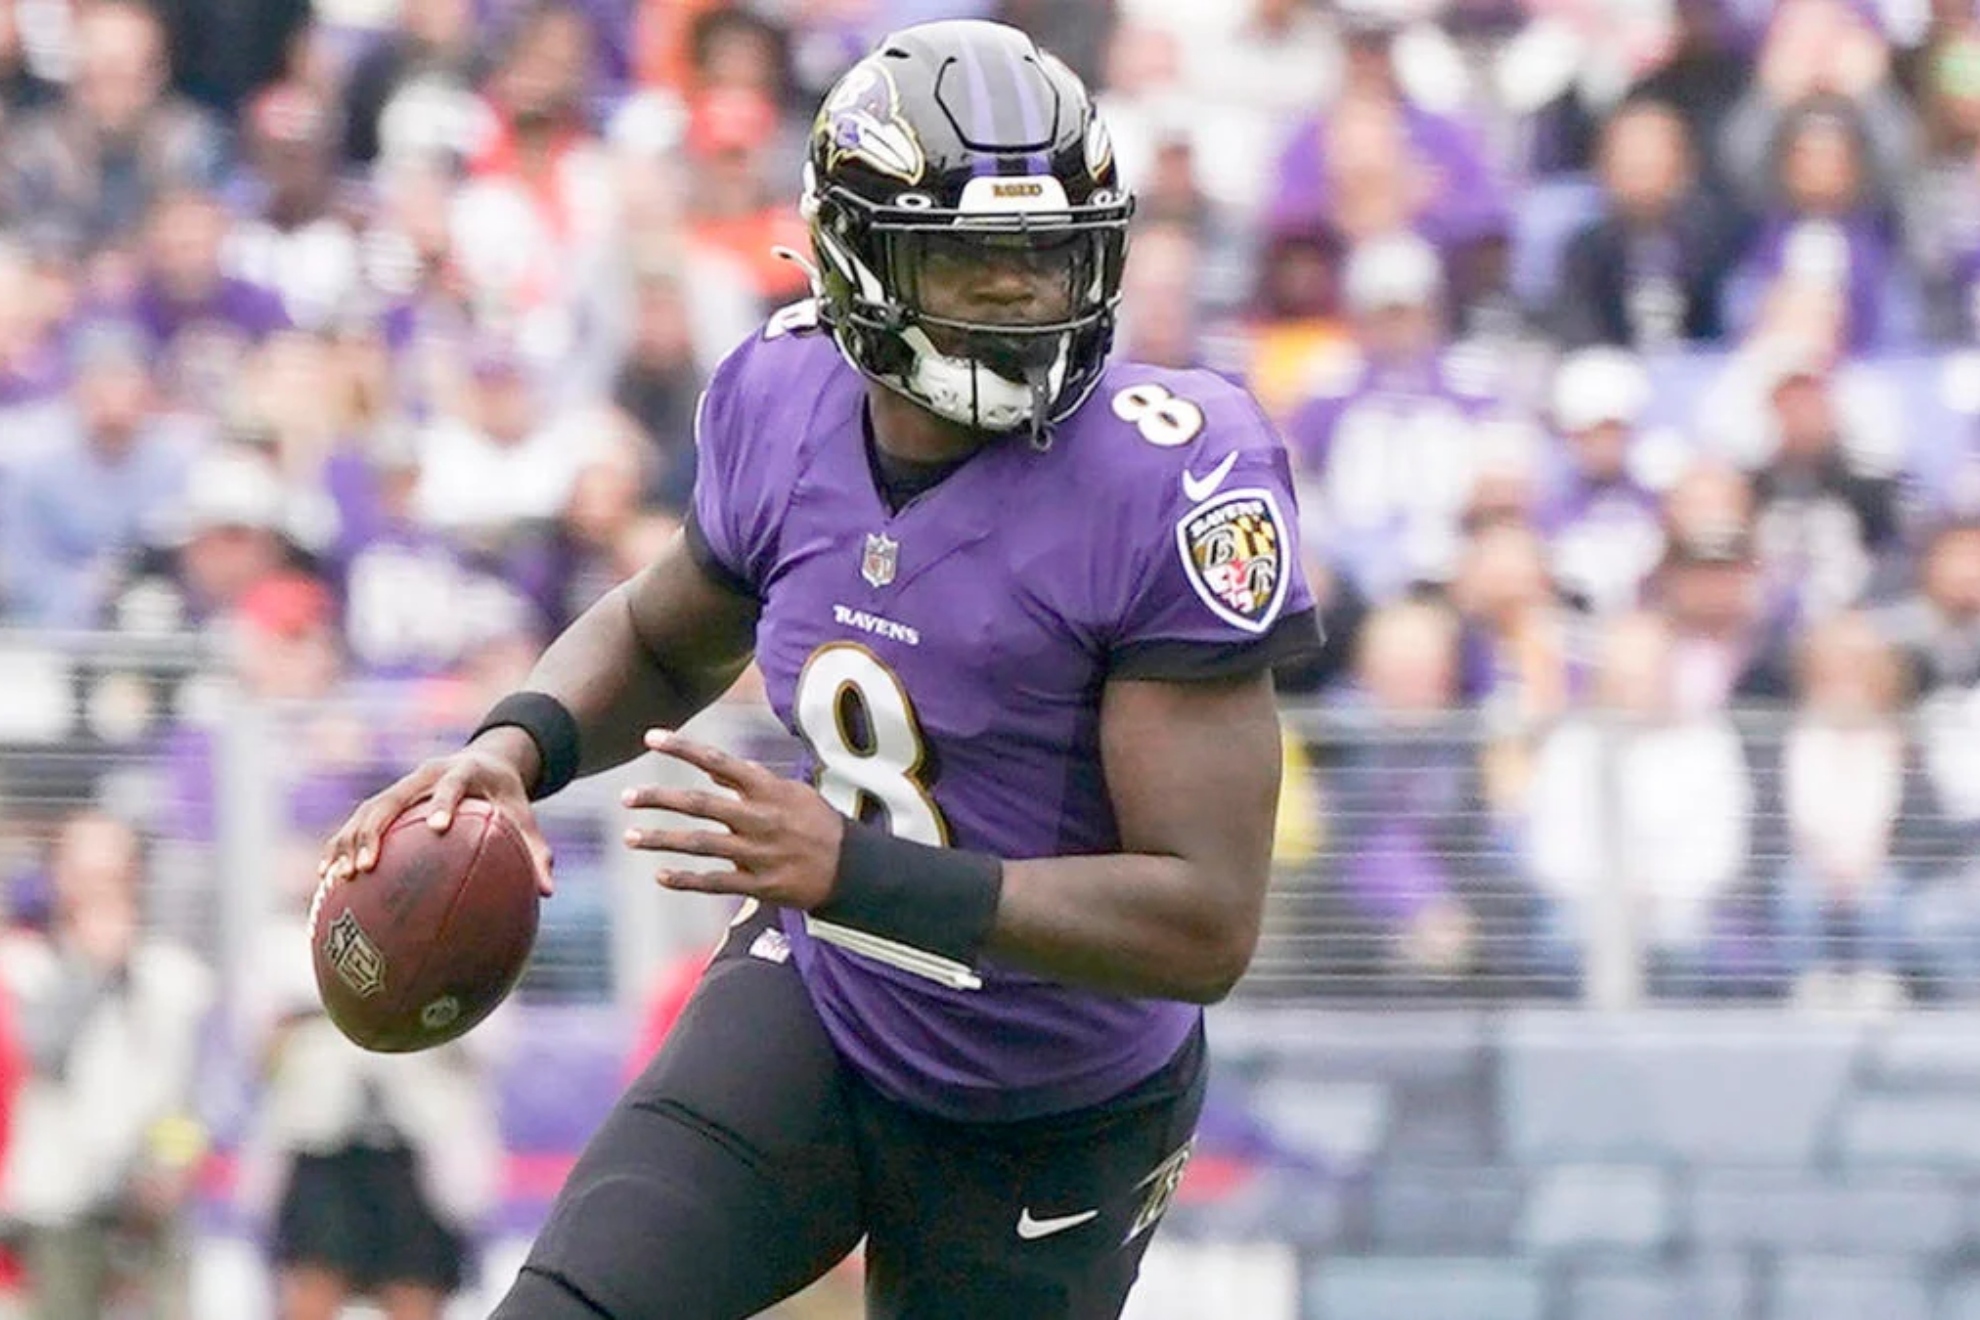 Pressure on potential suitors as Lamar Jackson becomes one of the top prizes in NFL Free Agency